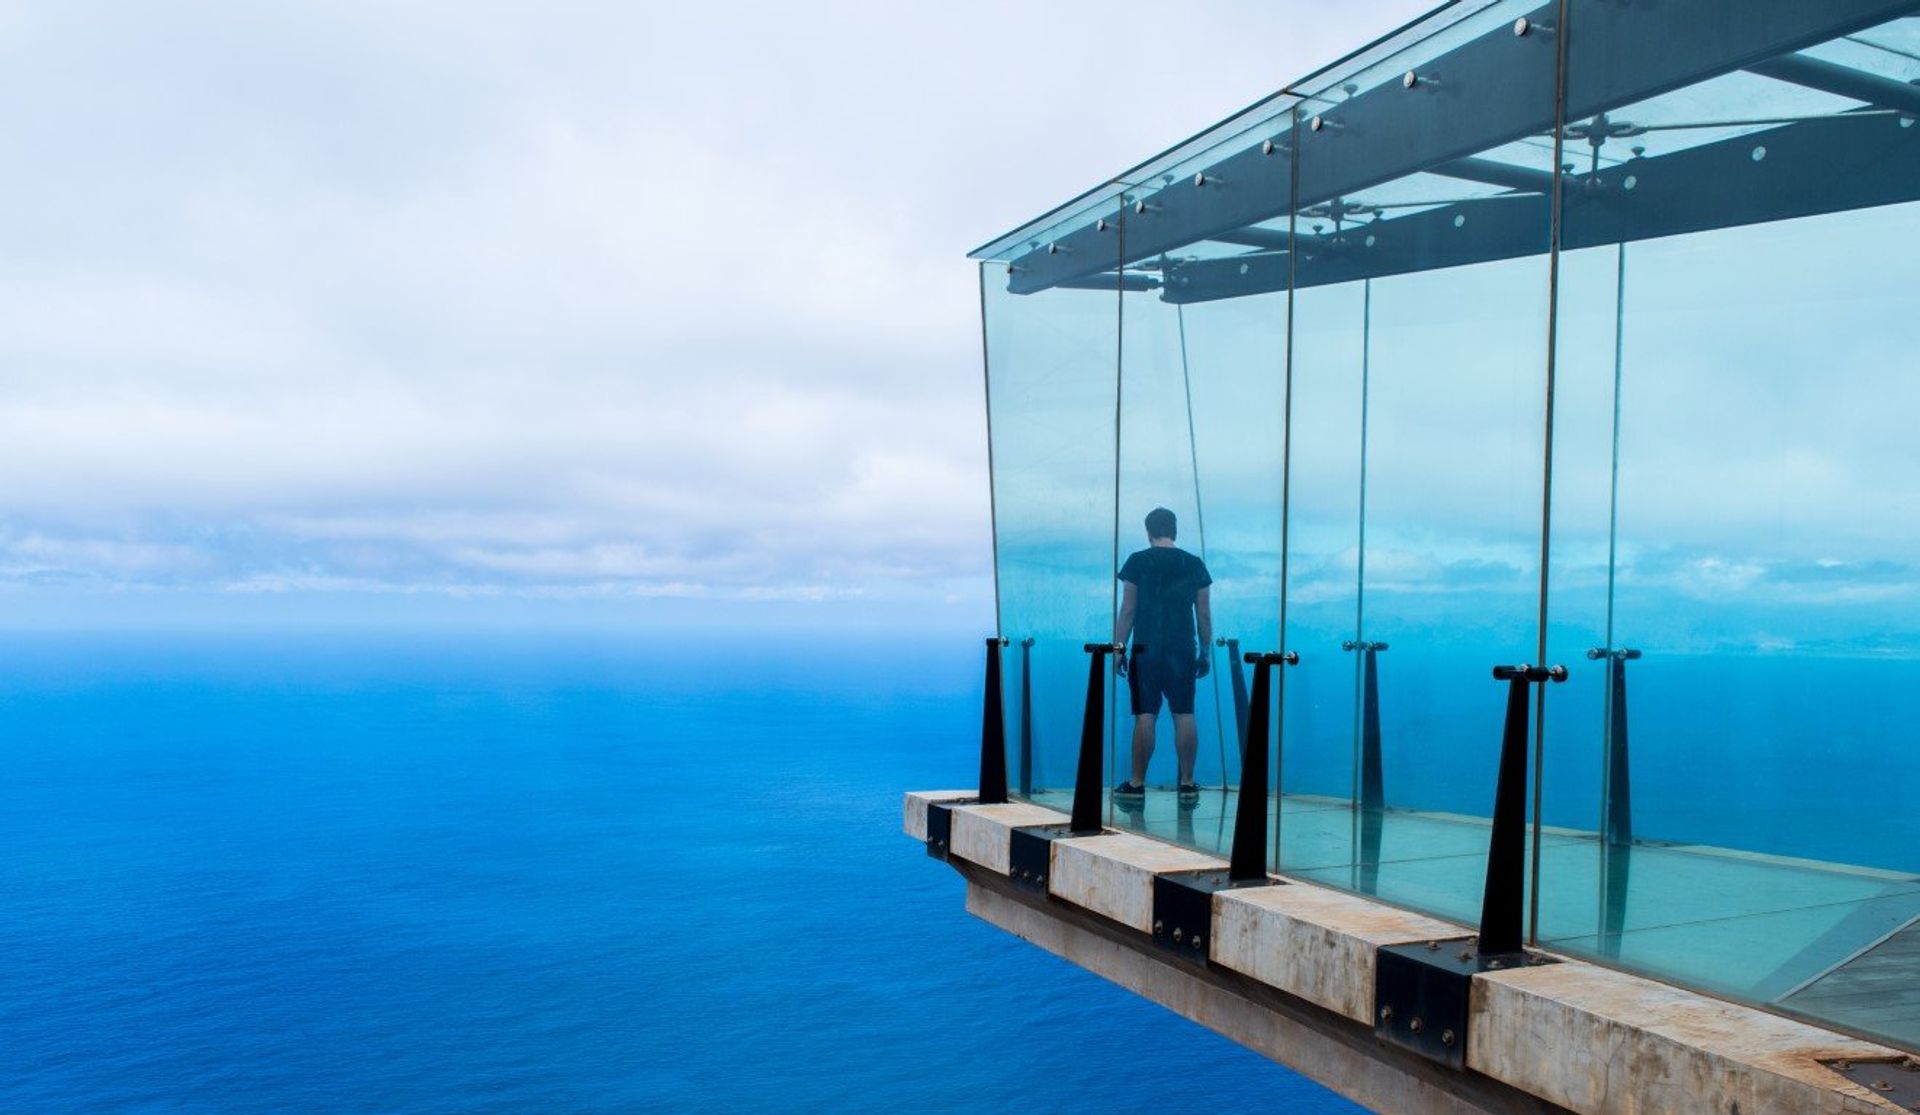 A window to the ocean! The Mirador de Abrante has a glass floor and is a definite attraction to tick off the list!